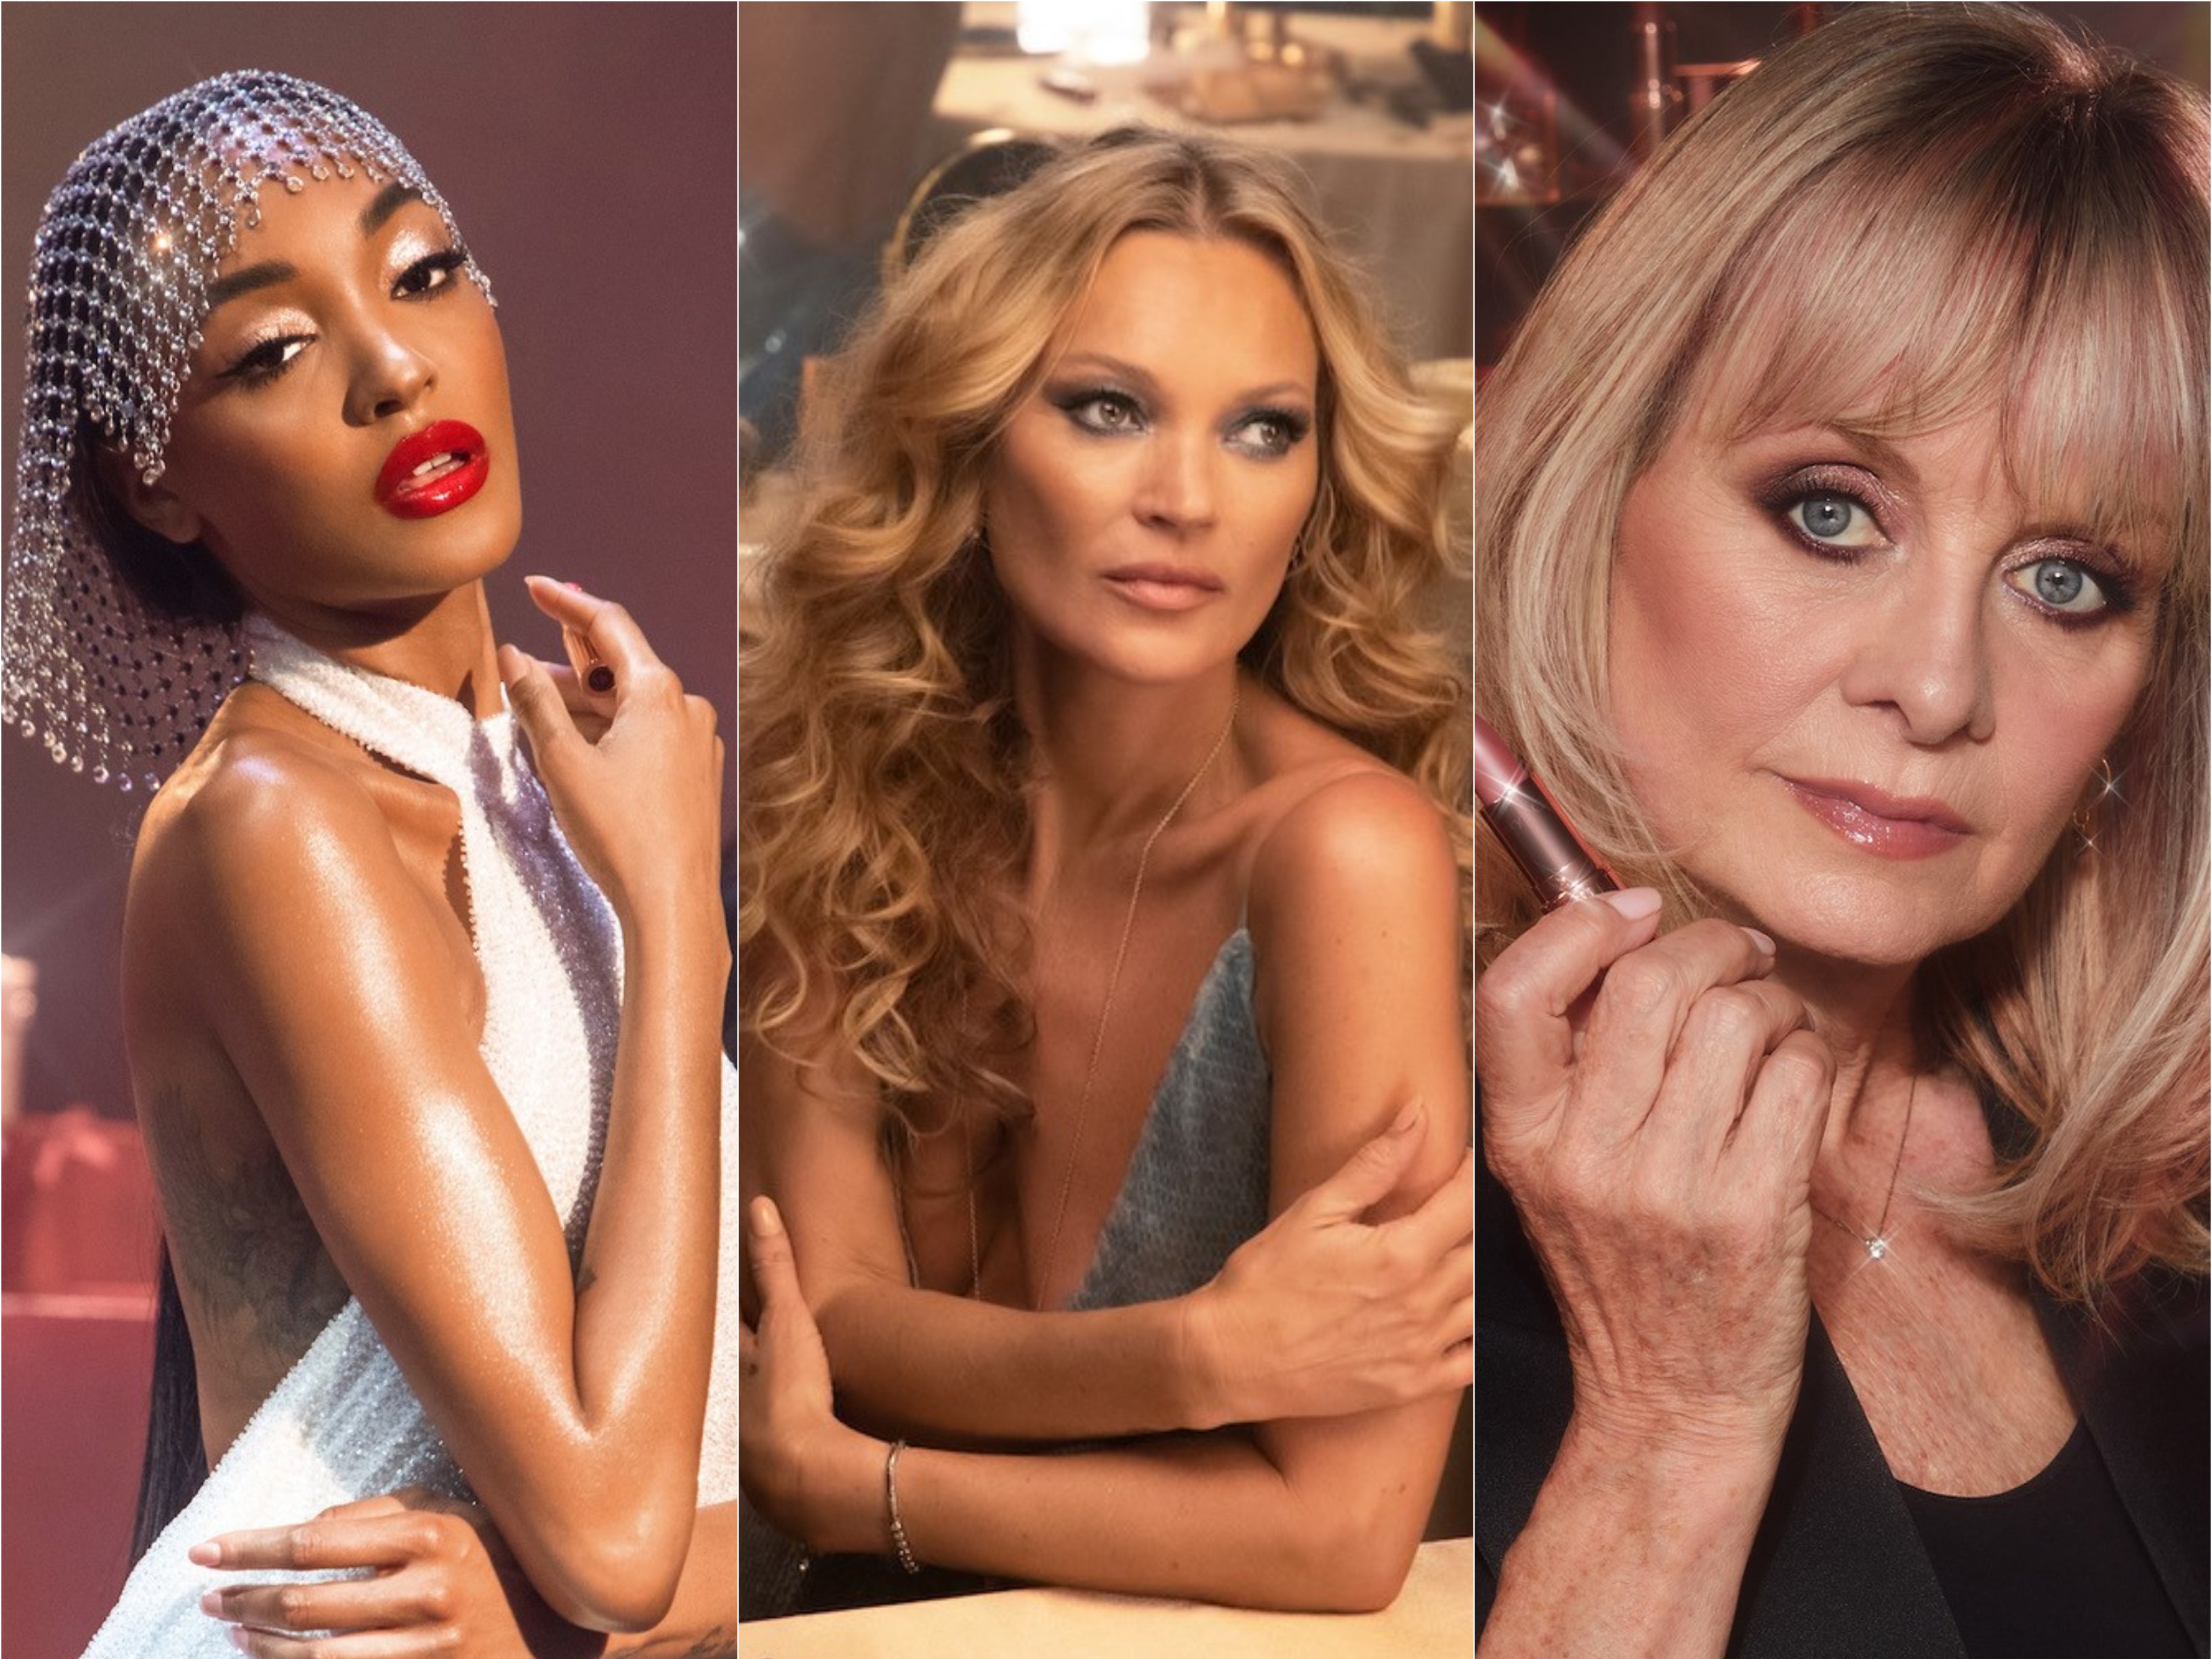 Models star in new Charlotte Tilbury campaign